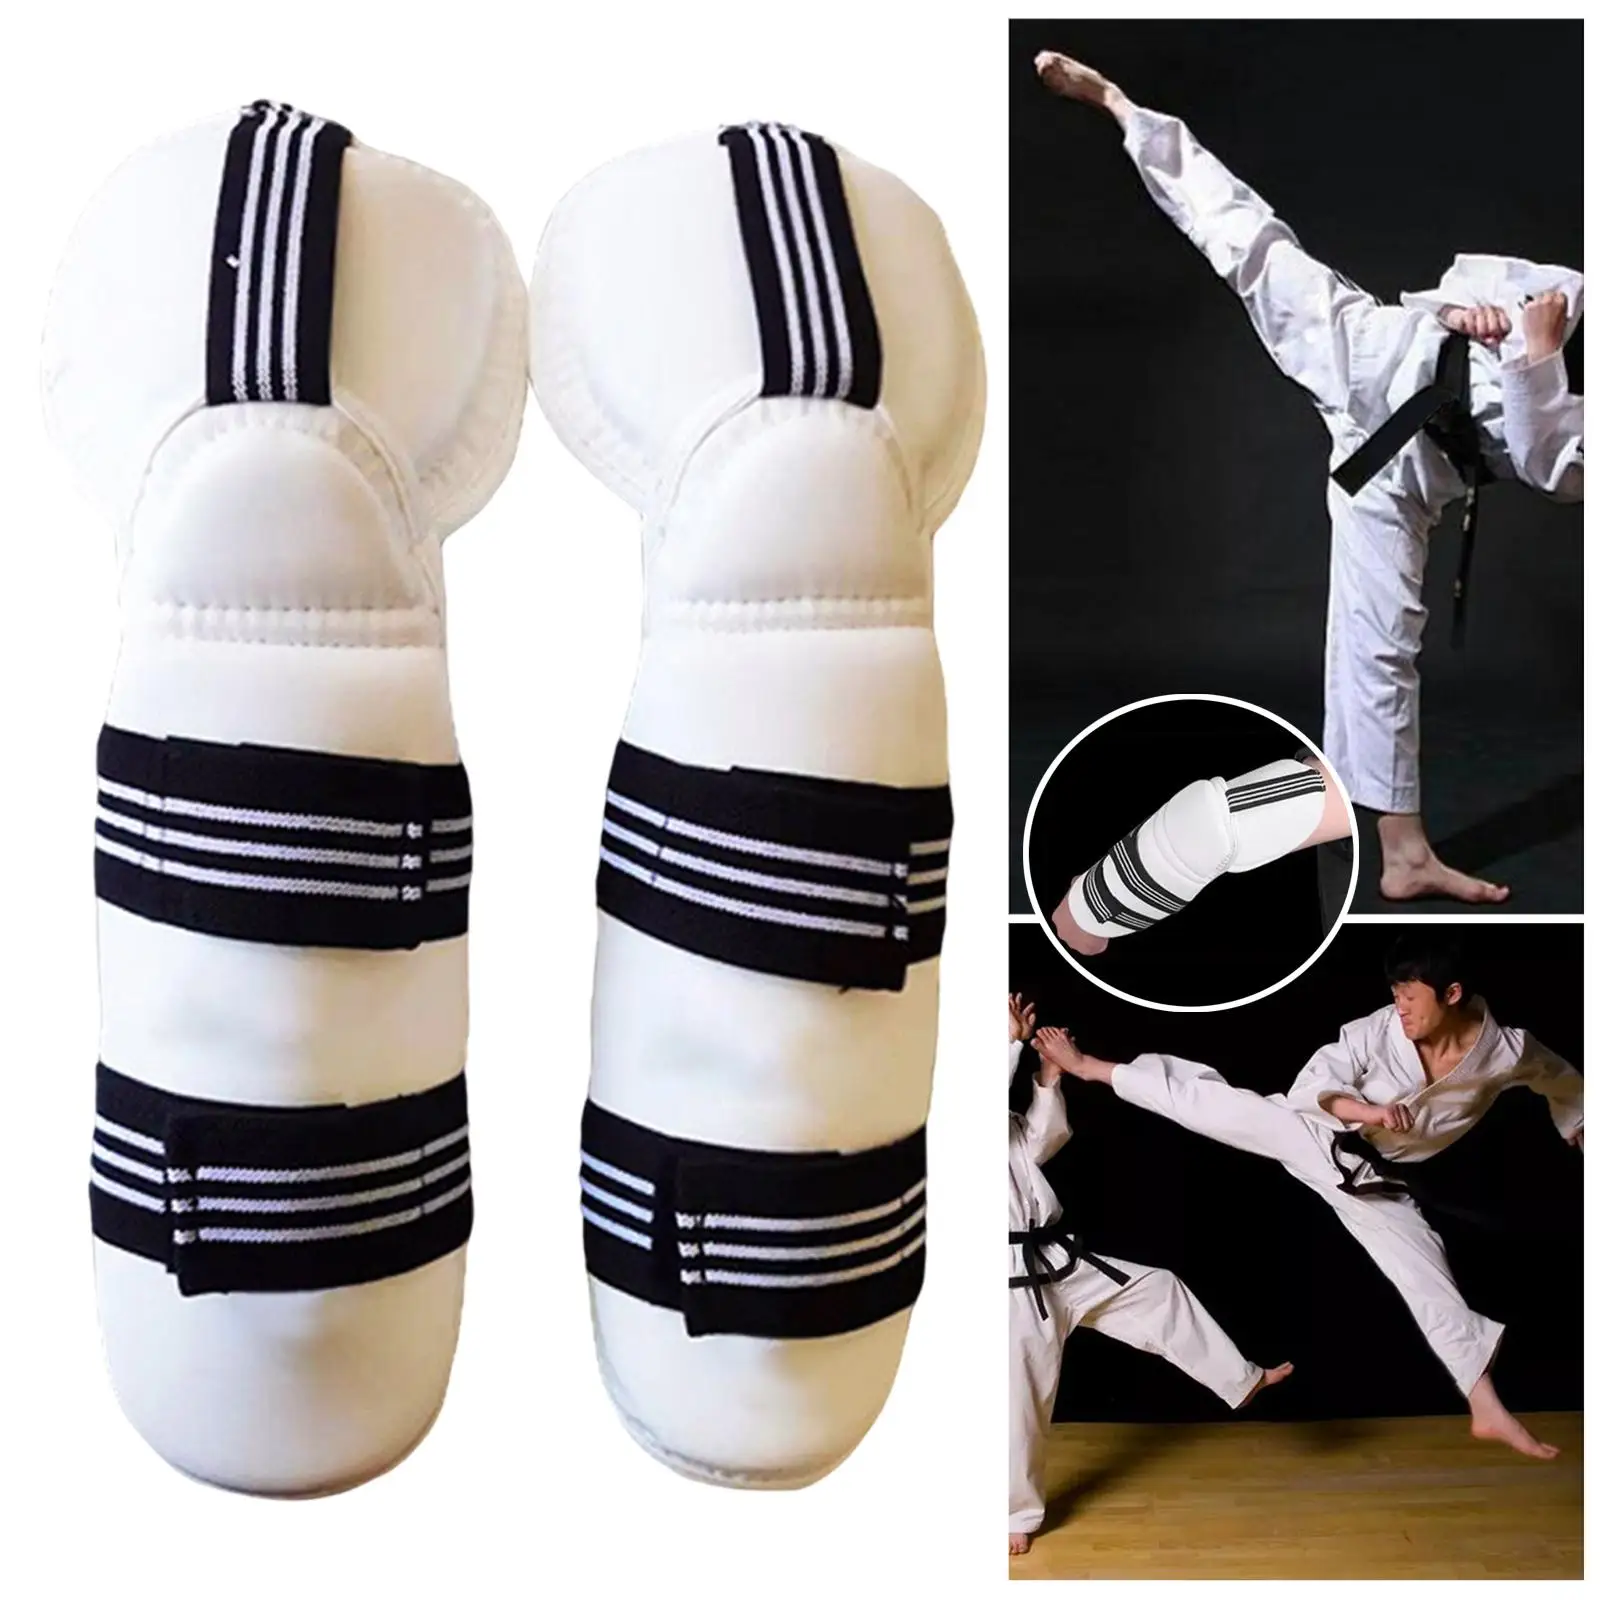 Protective Gear Impact Resistant Breathable Taekwondo Guard for Training Mma Fighting Unisex Adults Kids Kickboxing Muay Thai